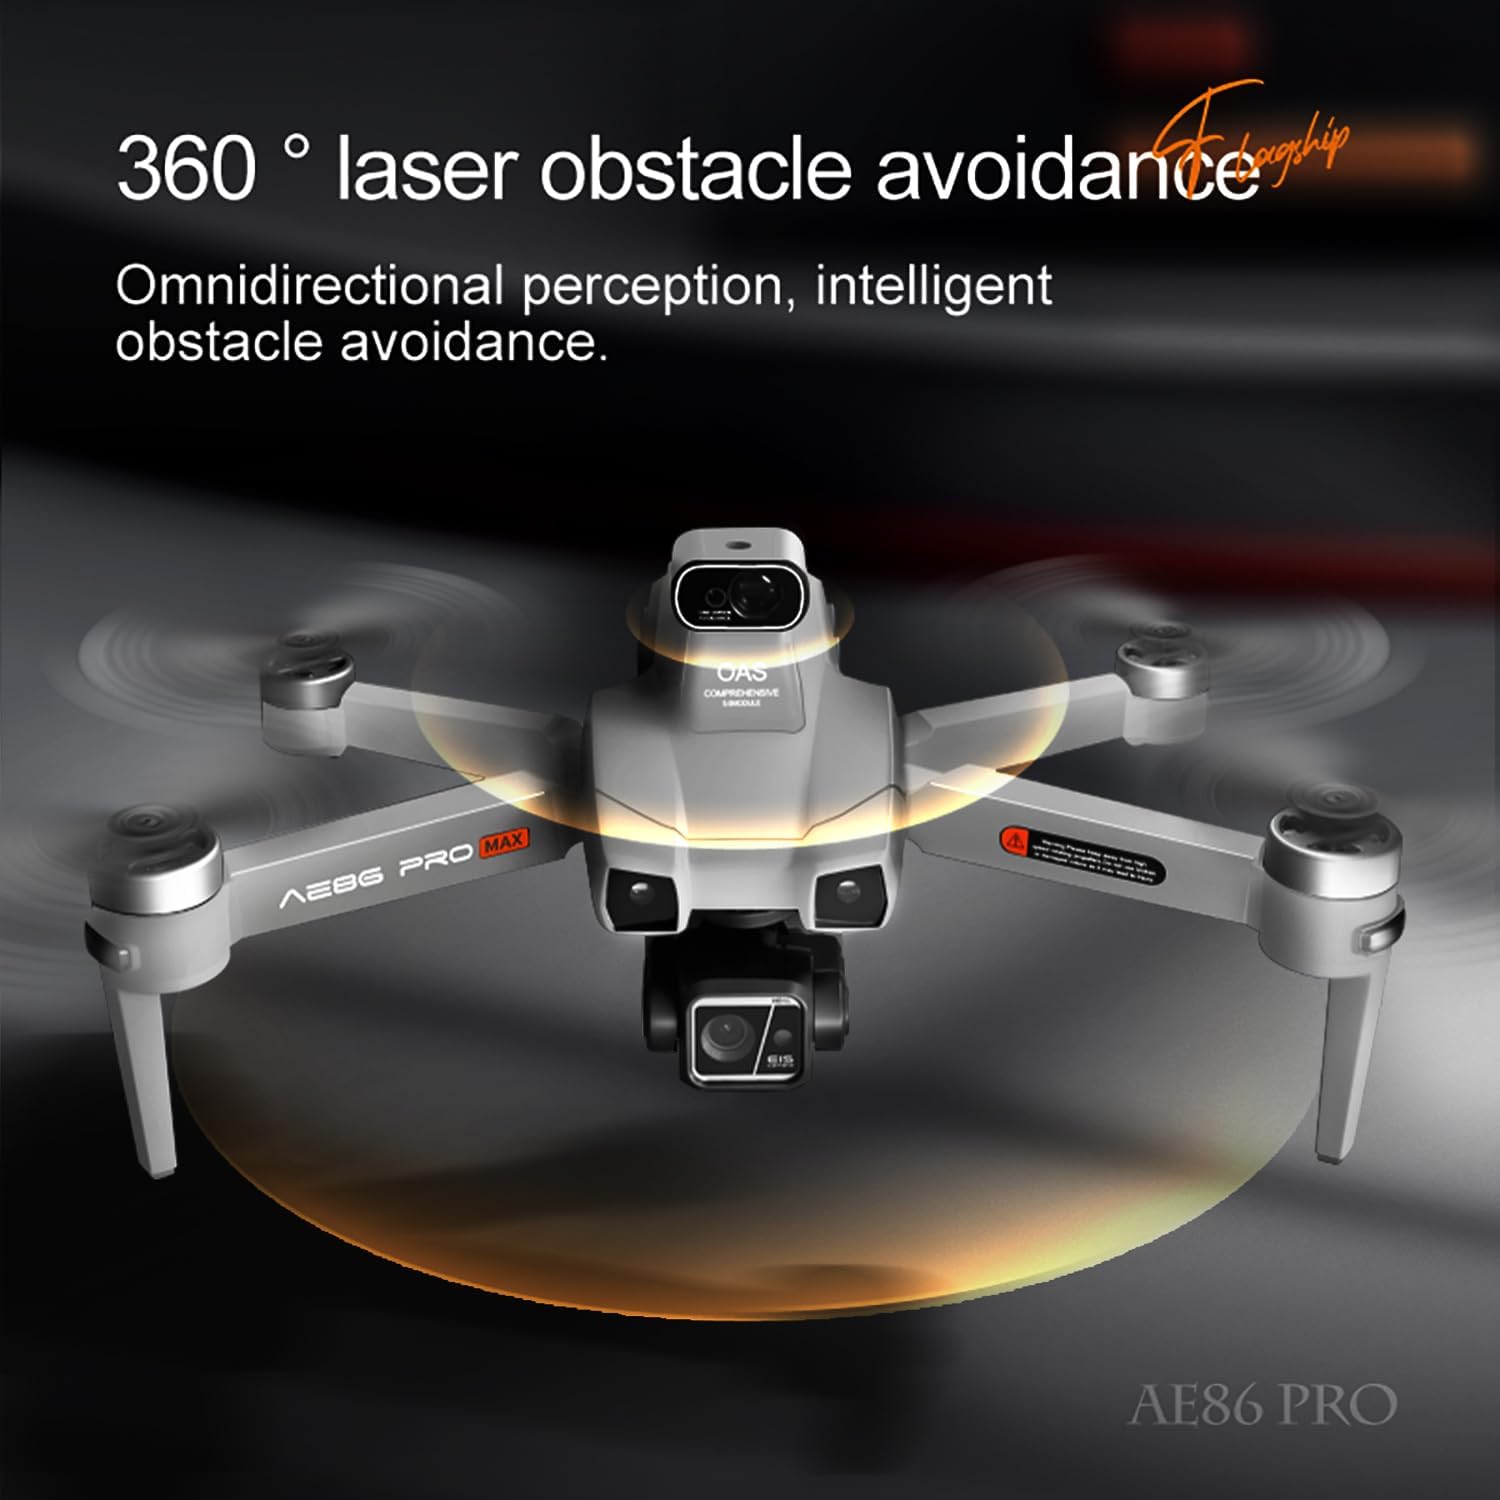 Bingchat AE86 Pro -Drone With Laser Obstacle avoidance